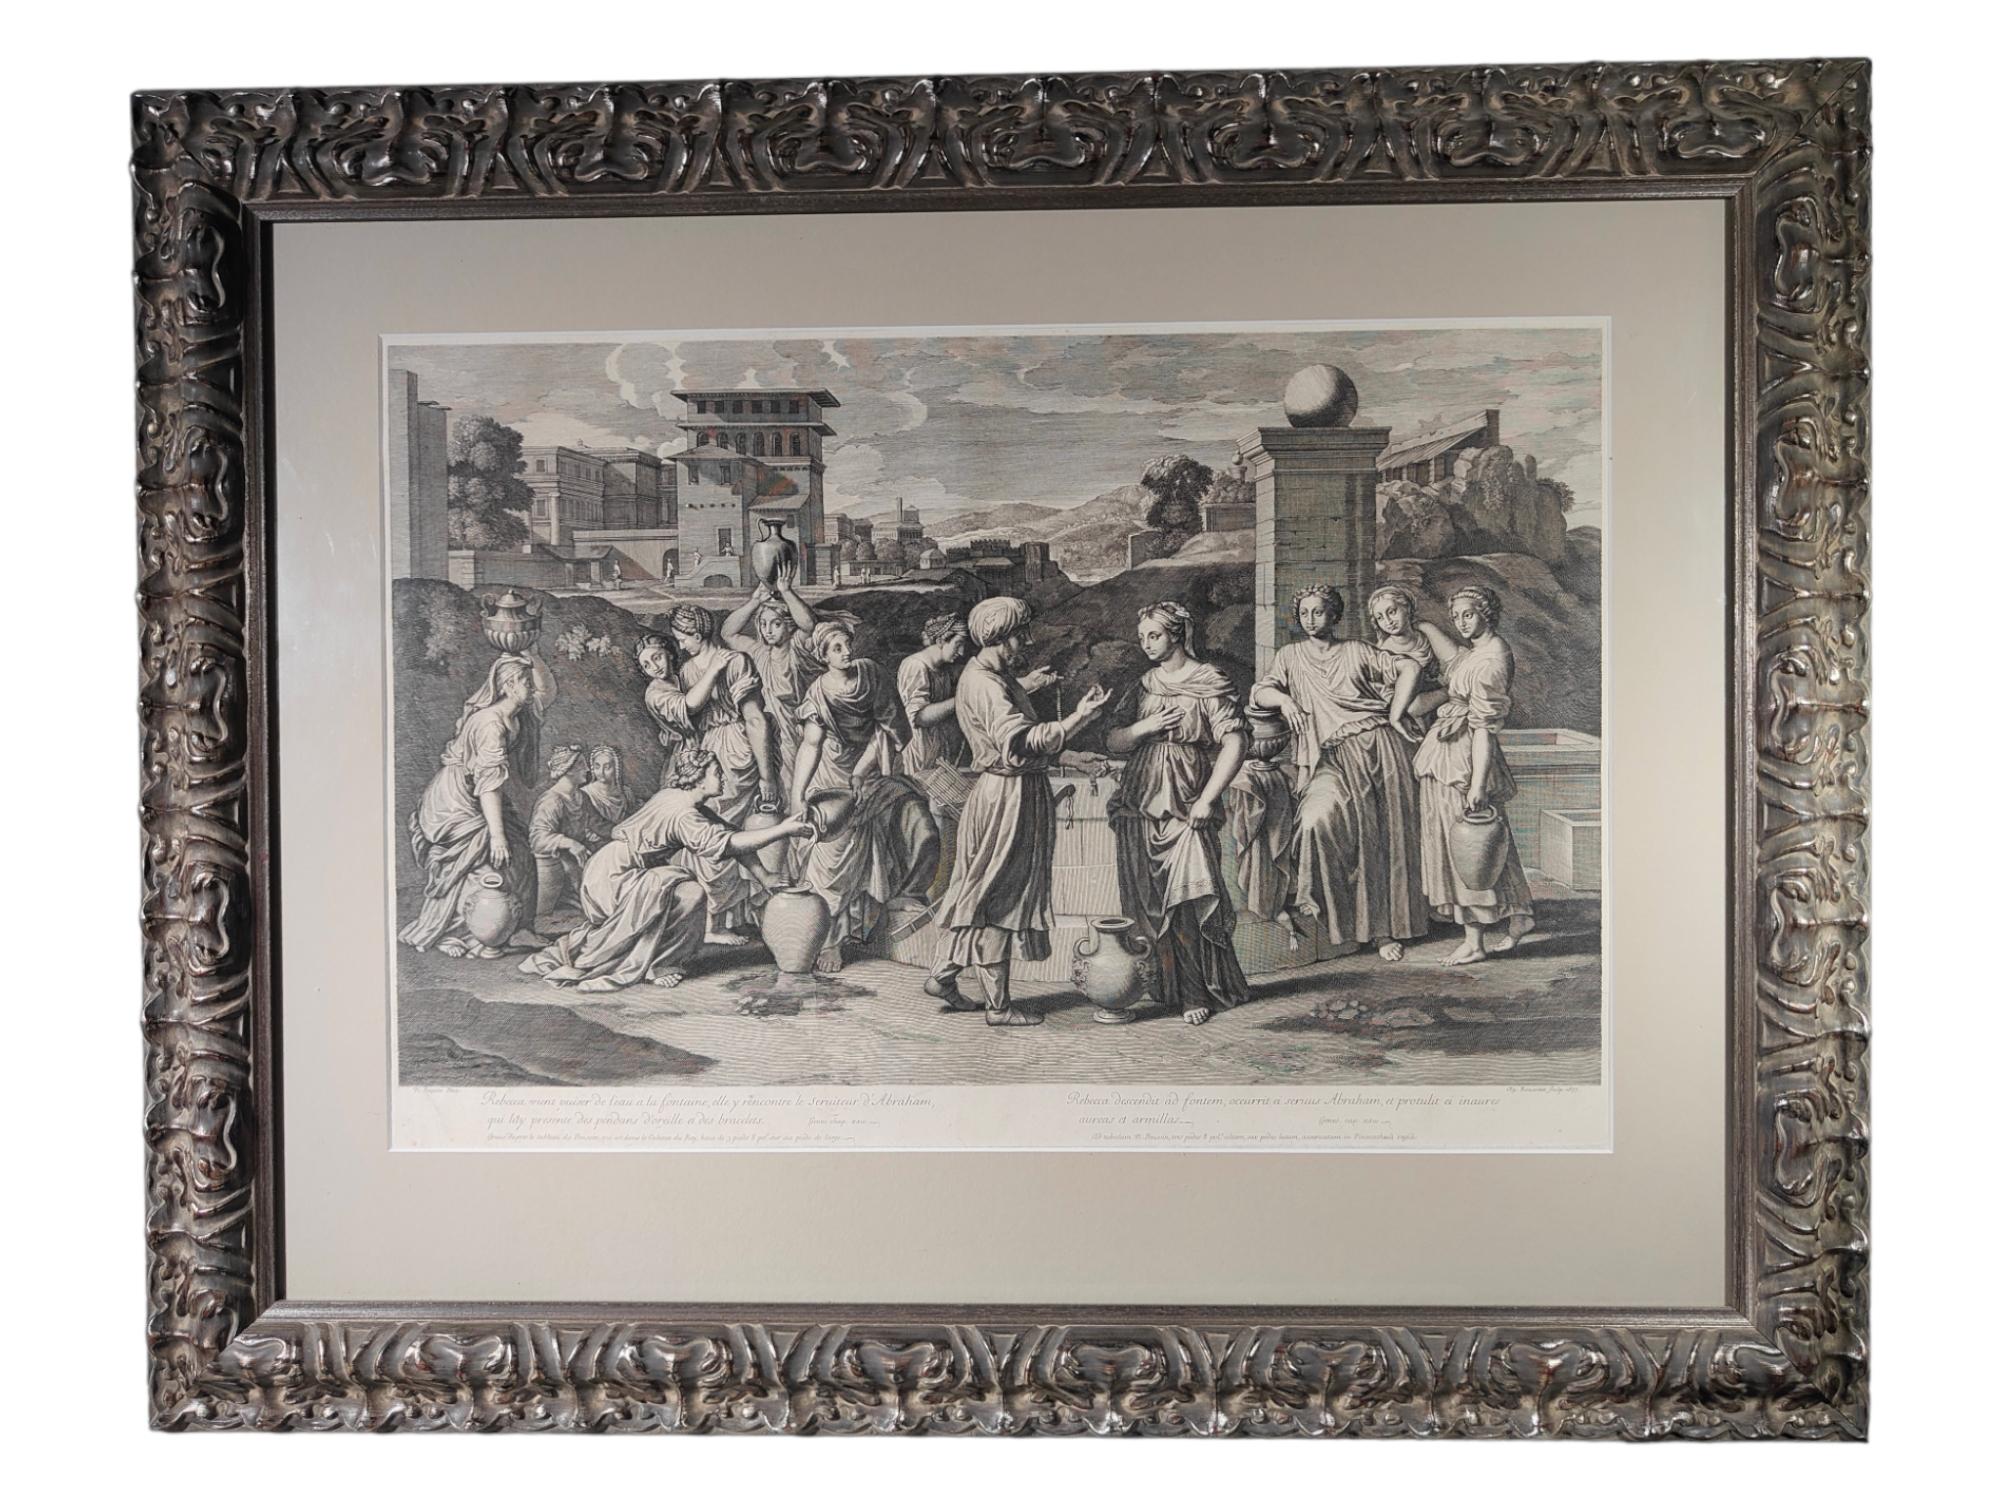 Old engraving from the 17th century: Nicolas Paussin 1677
Large seventeenth century engraving dated 1677. With very decorative back frame total measures: 91x71 cm and only the engraving 64x44 cm.